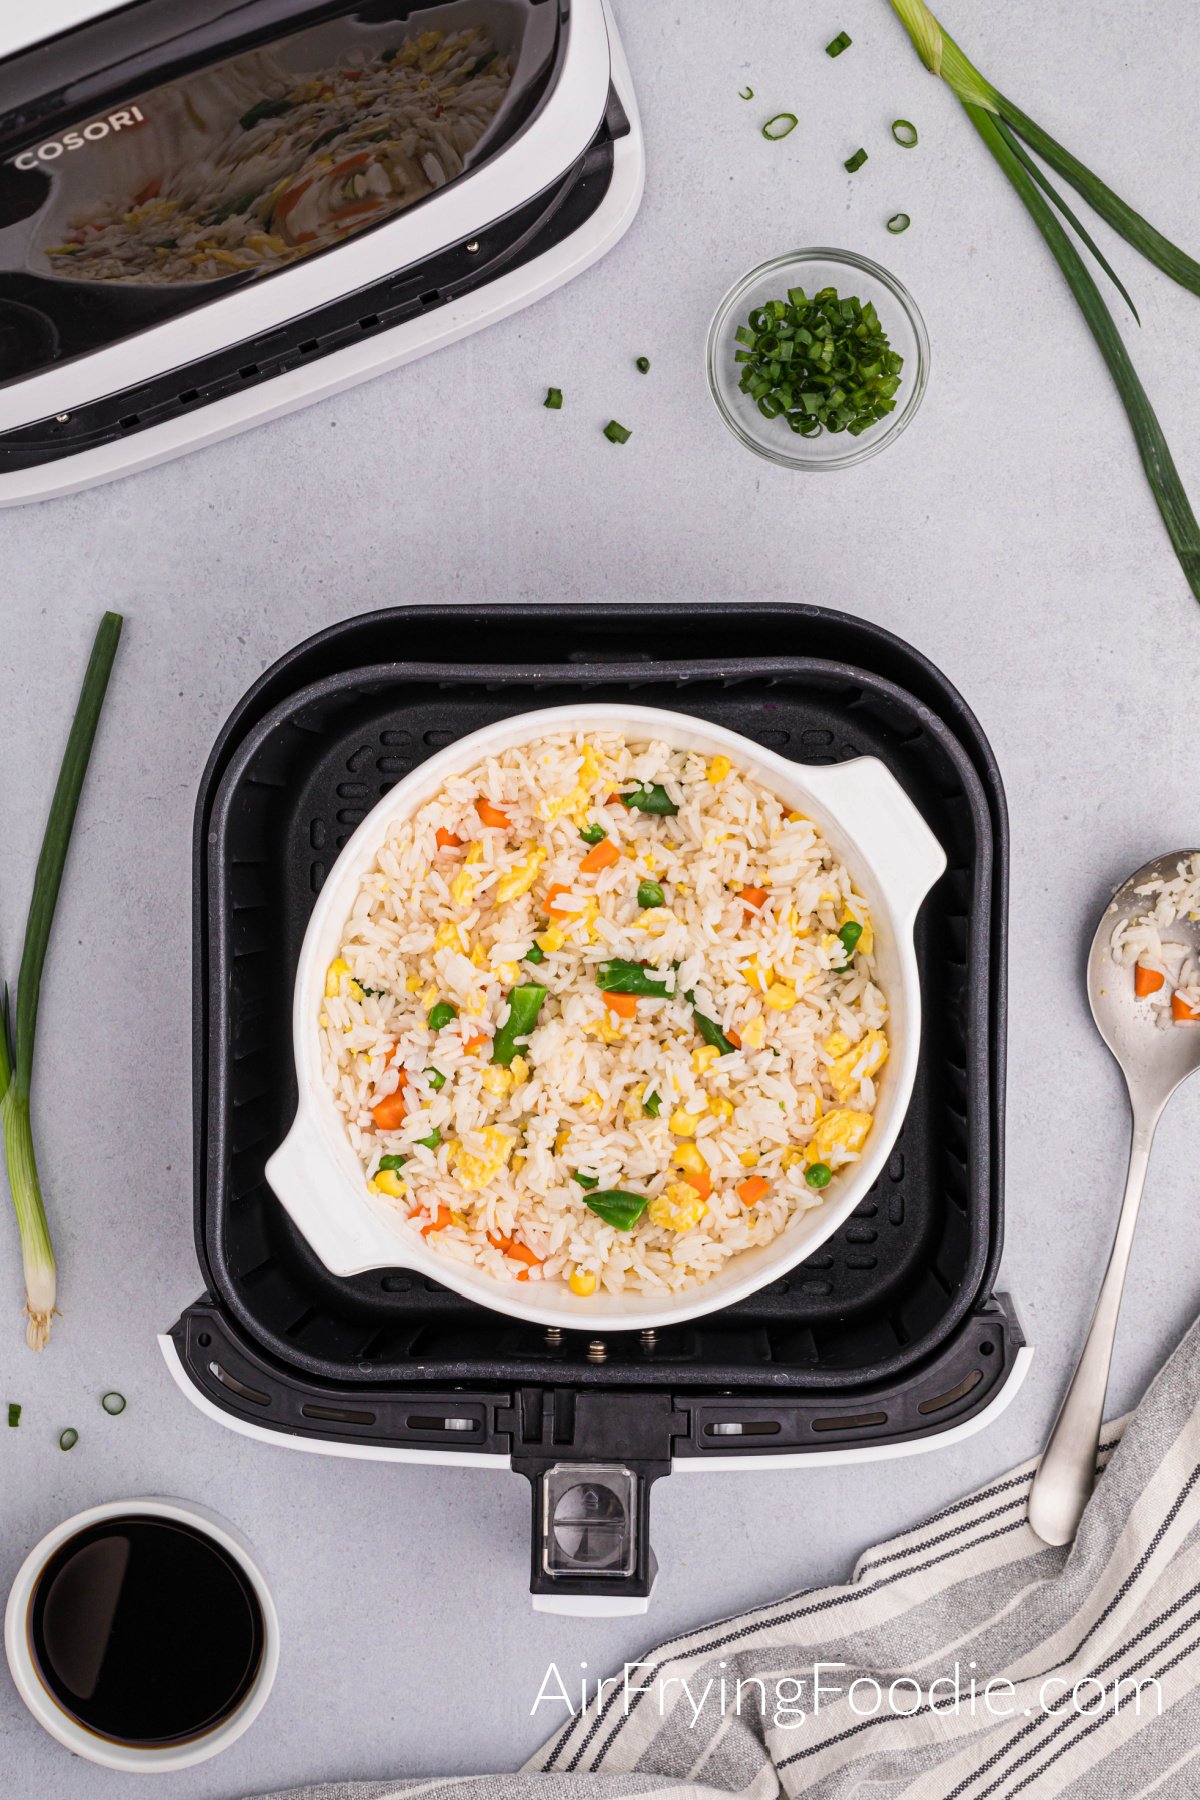 A large ramekin of fried rice in the air fryer basket with green onions sprinkled on top. There is a spoon to the right of the air fryer basket and a bowl of green onions above the air fryer basket. The base of the air fryer basket is at the top left of the picture.